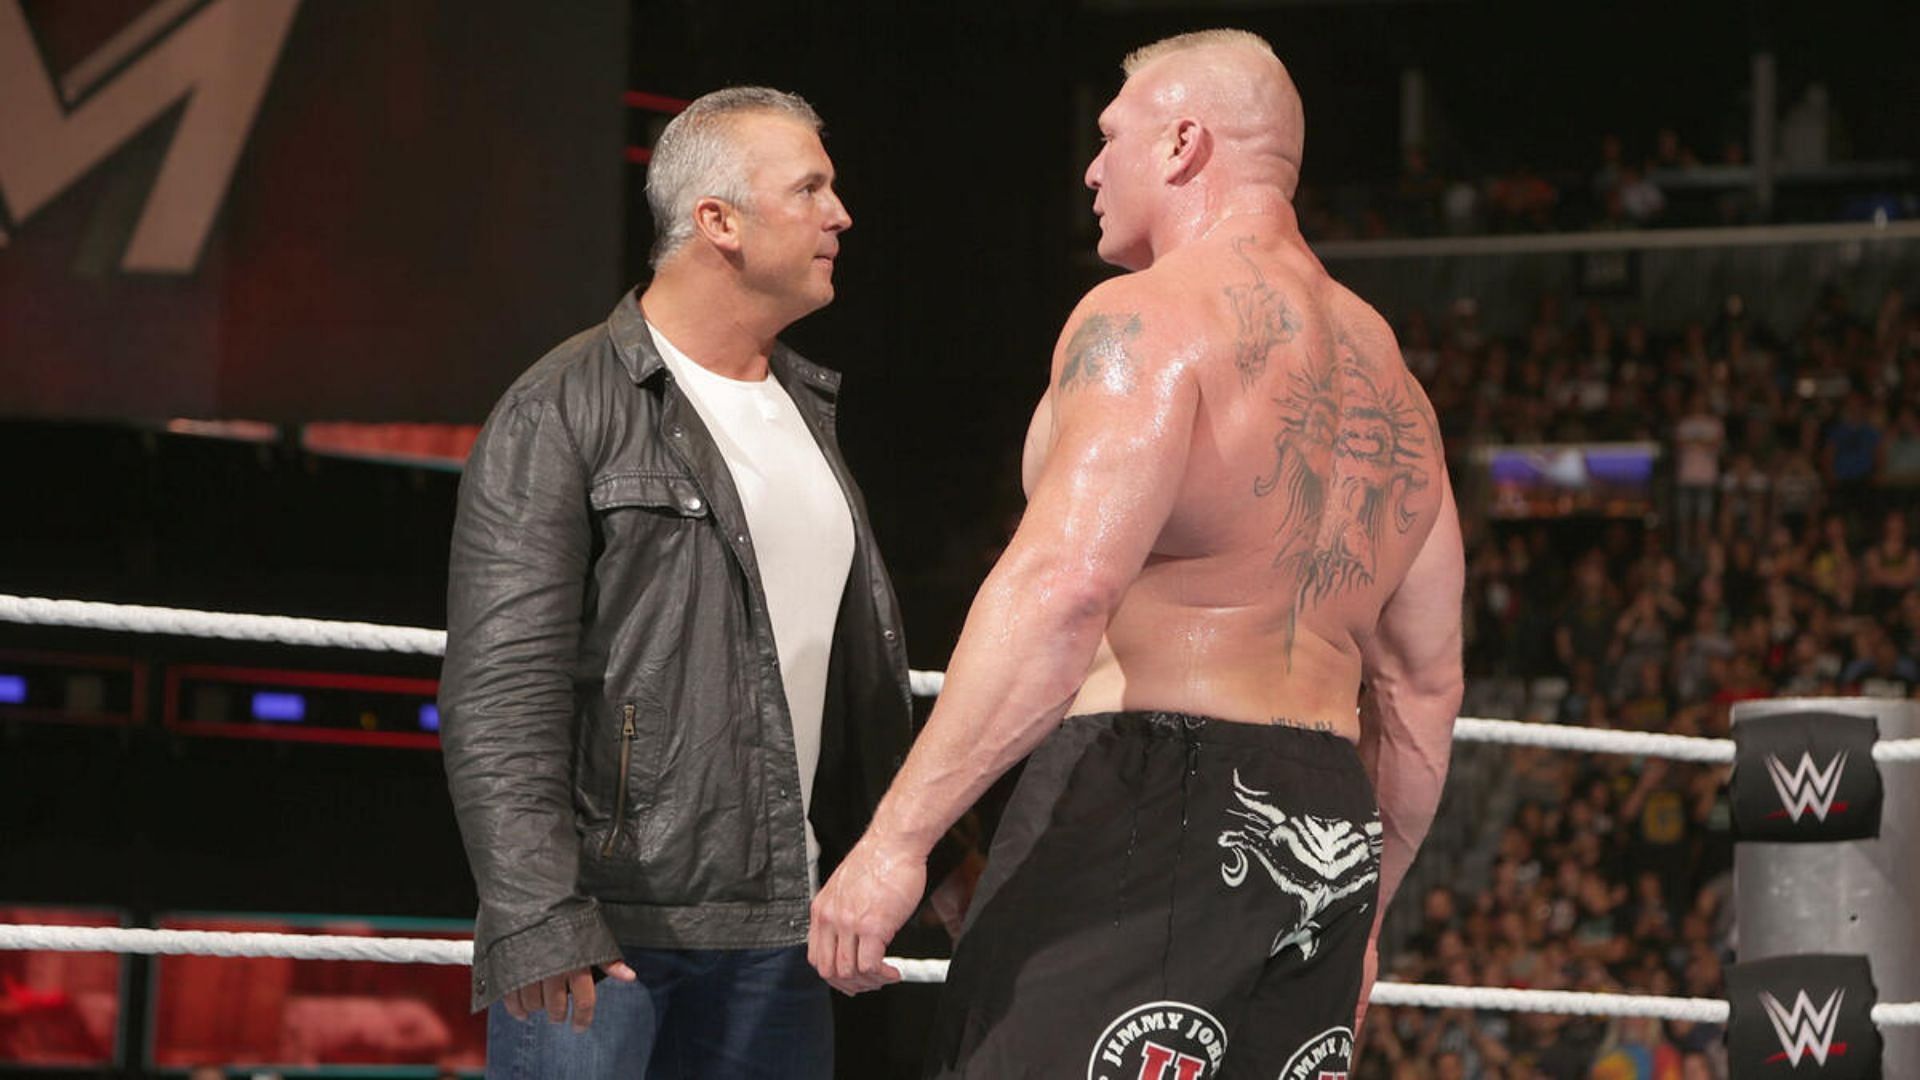 Brock Lesnar and Shane McMahon have been involved in many WrestleMania matches